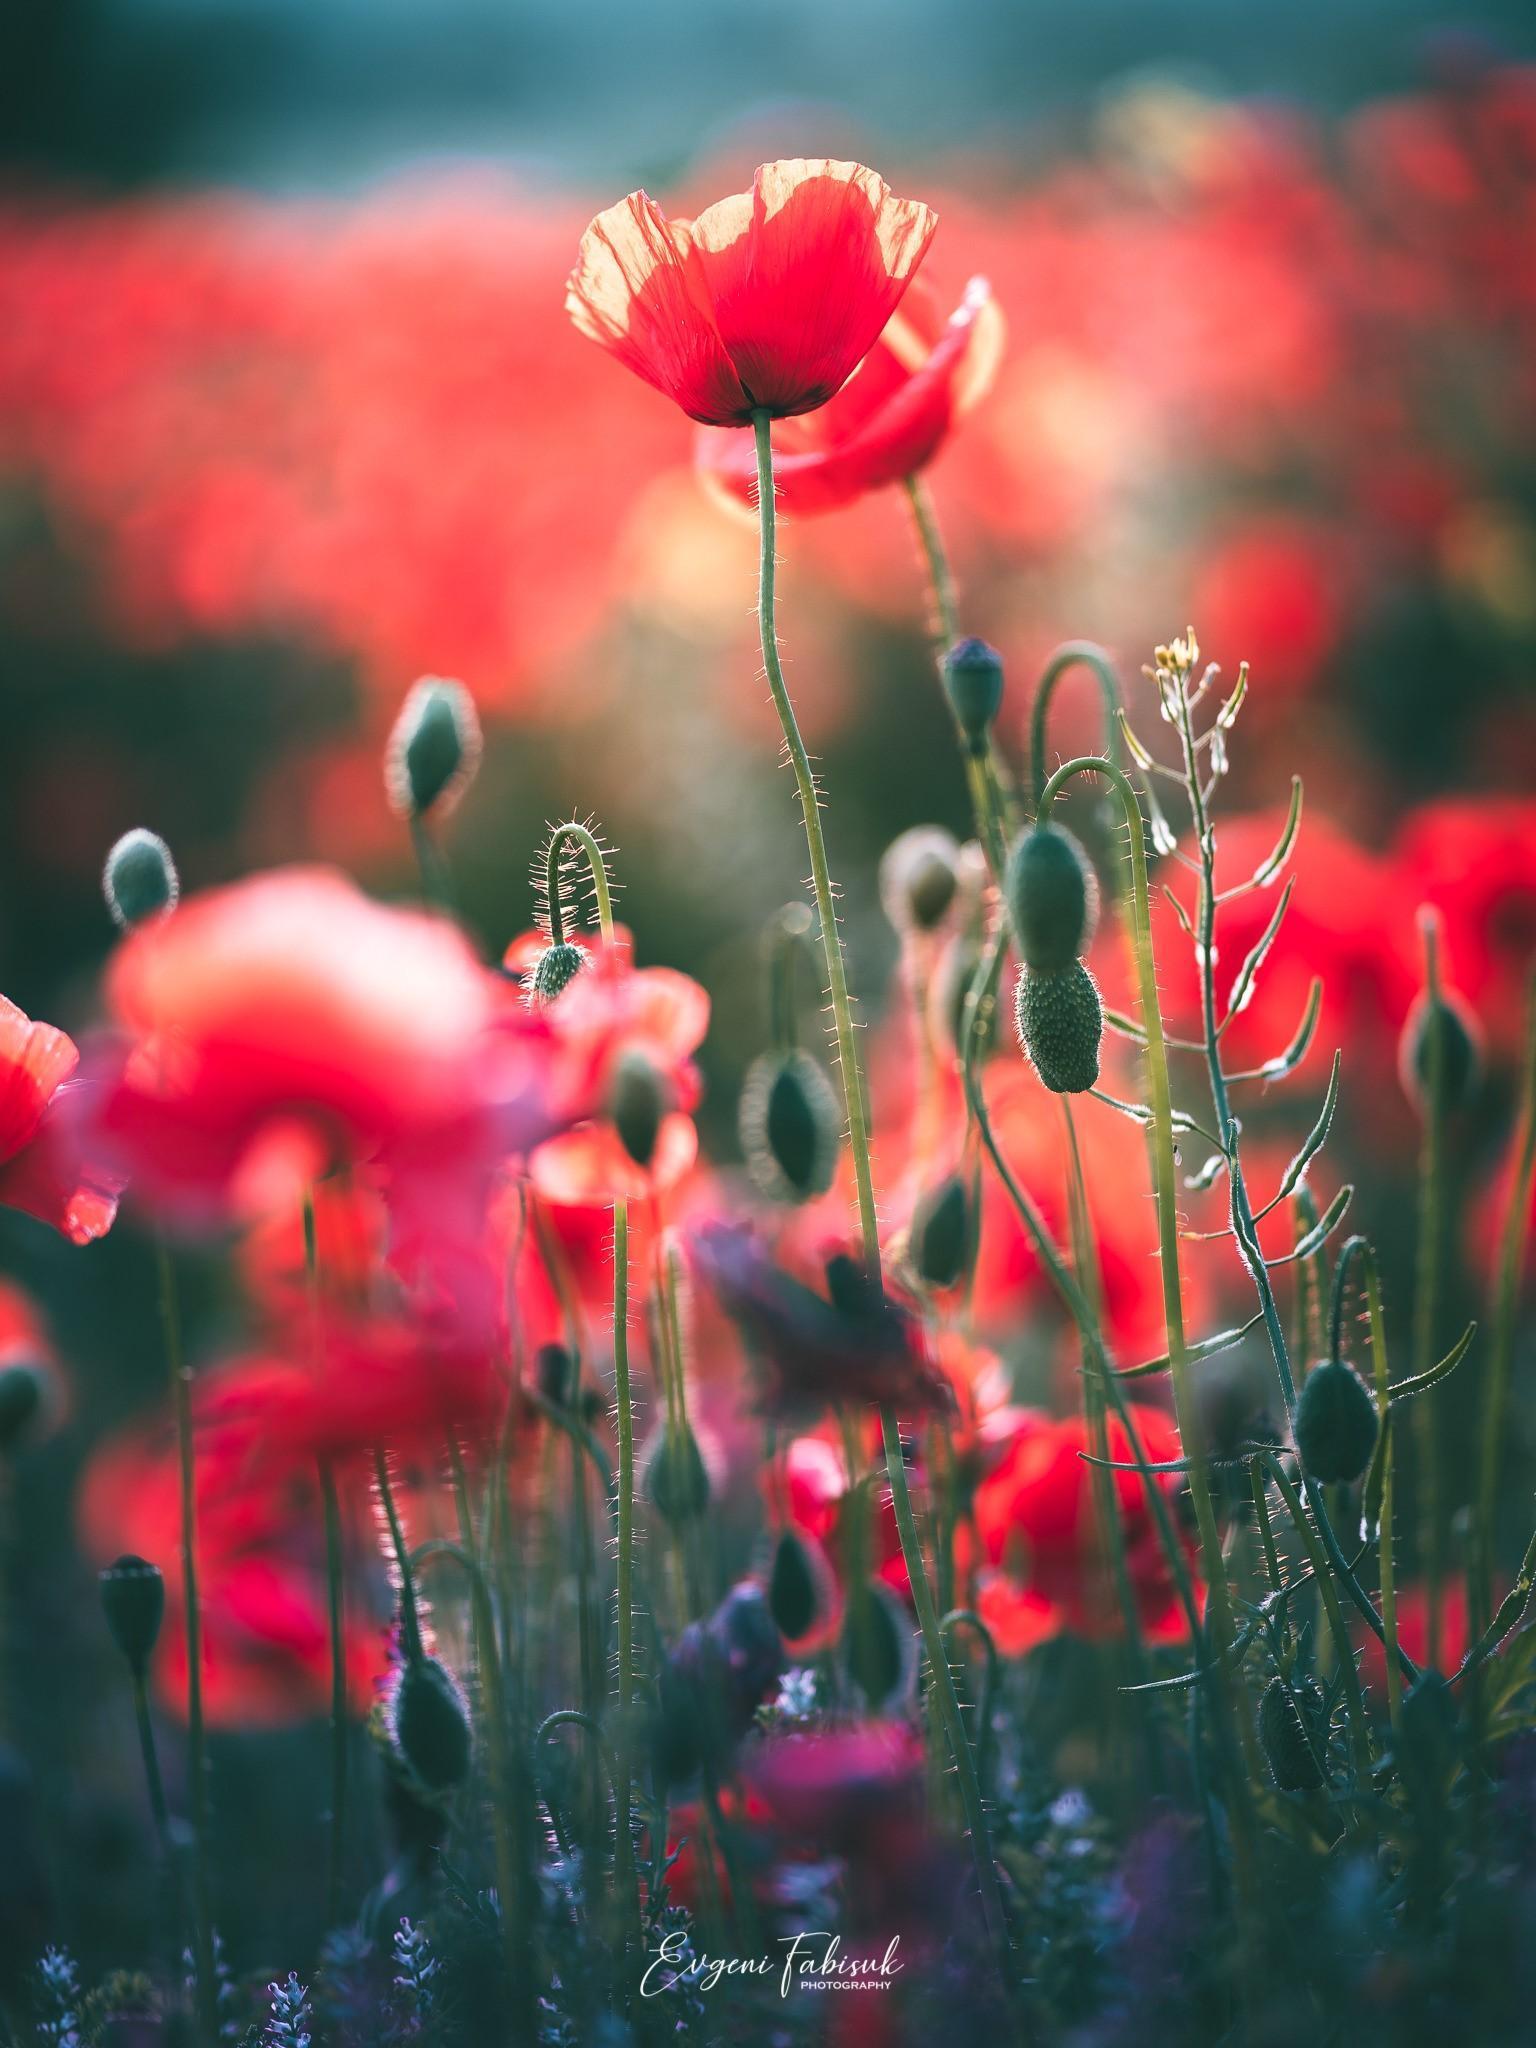 HD wallpaper, Landscape, Field, Grass, Plants, Poppies, Green, Red, Evgeni Fabisuk, Photography, Flowers, Leaves, Nature